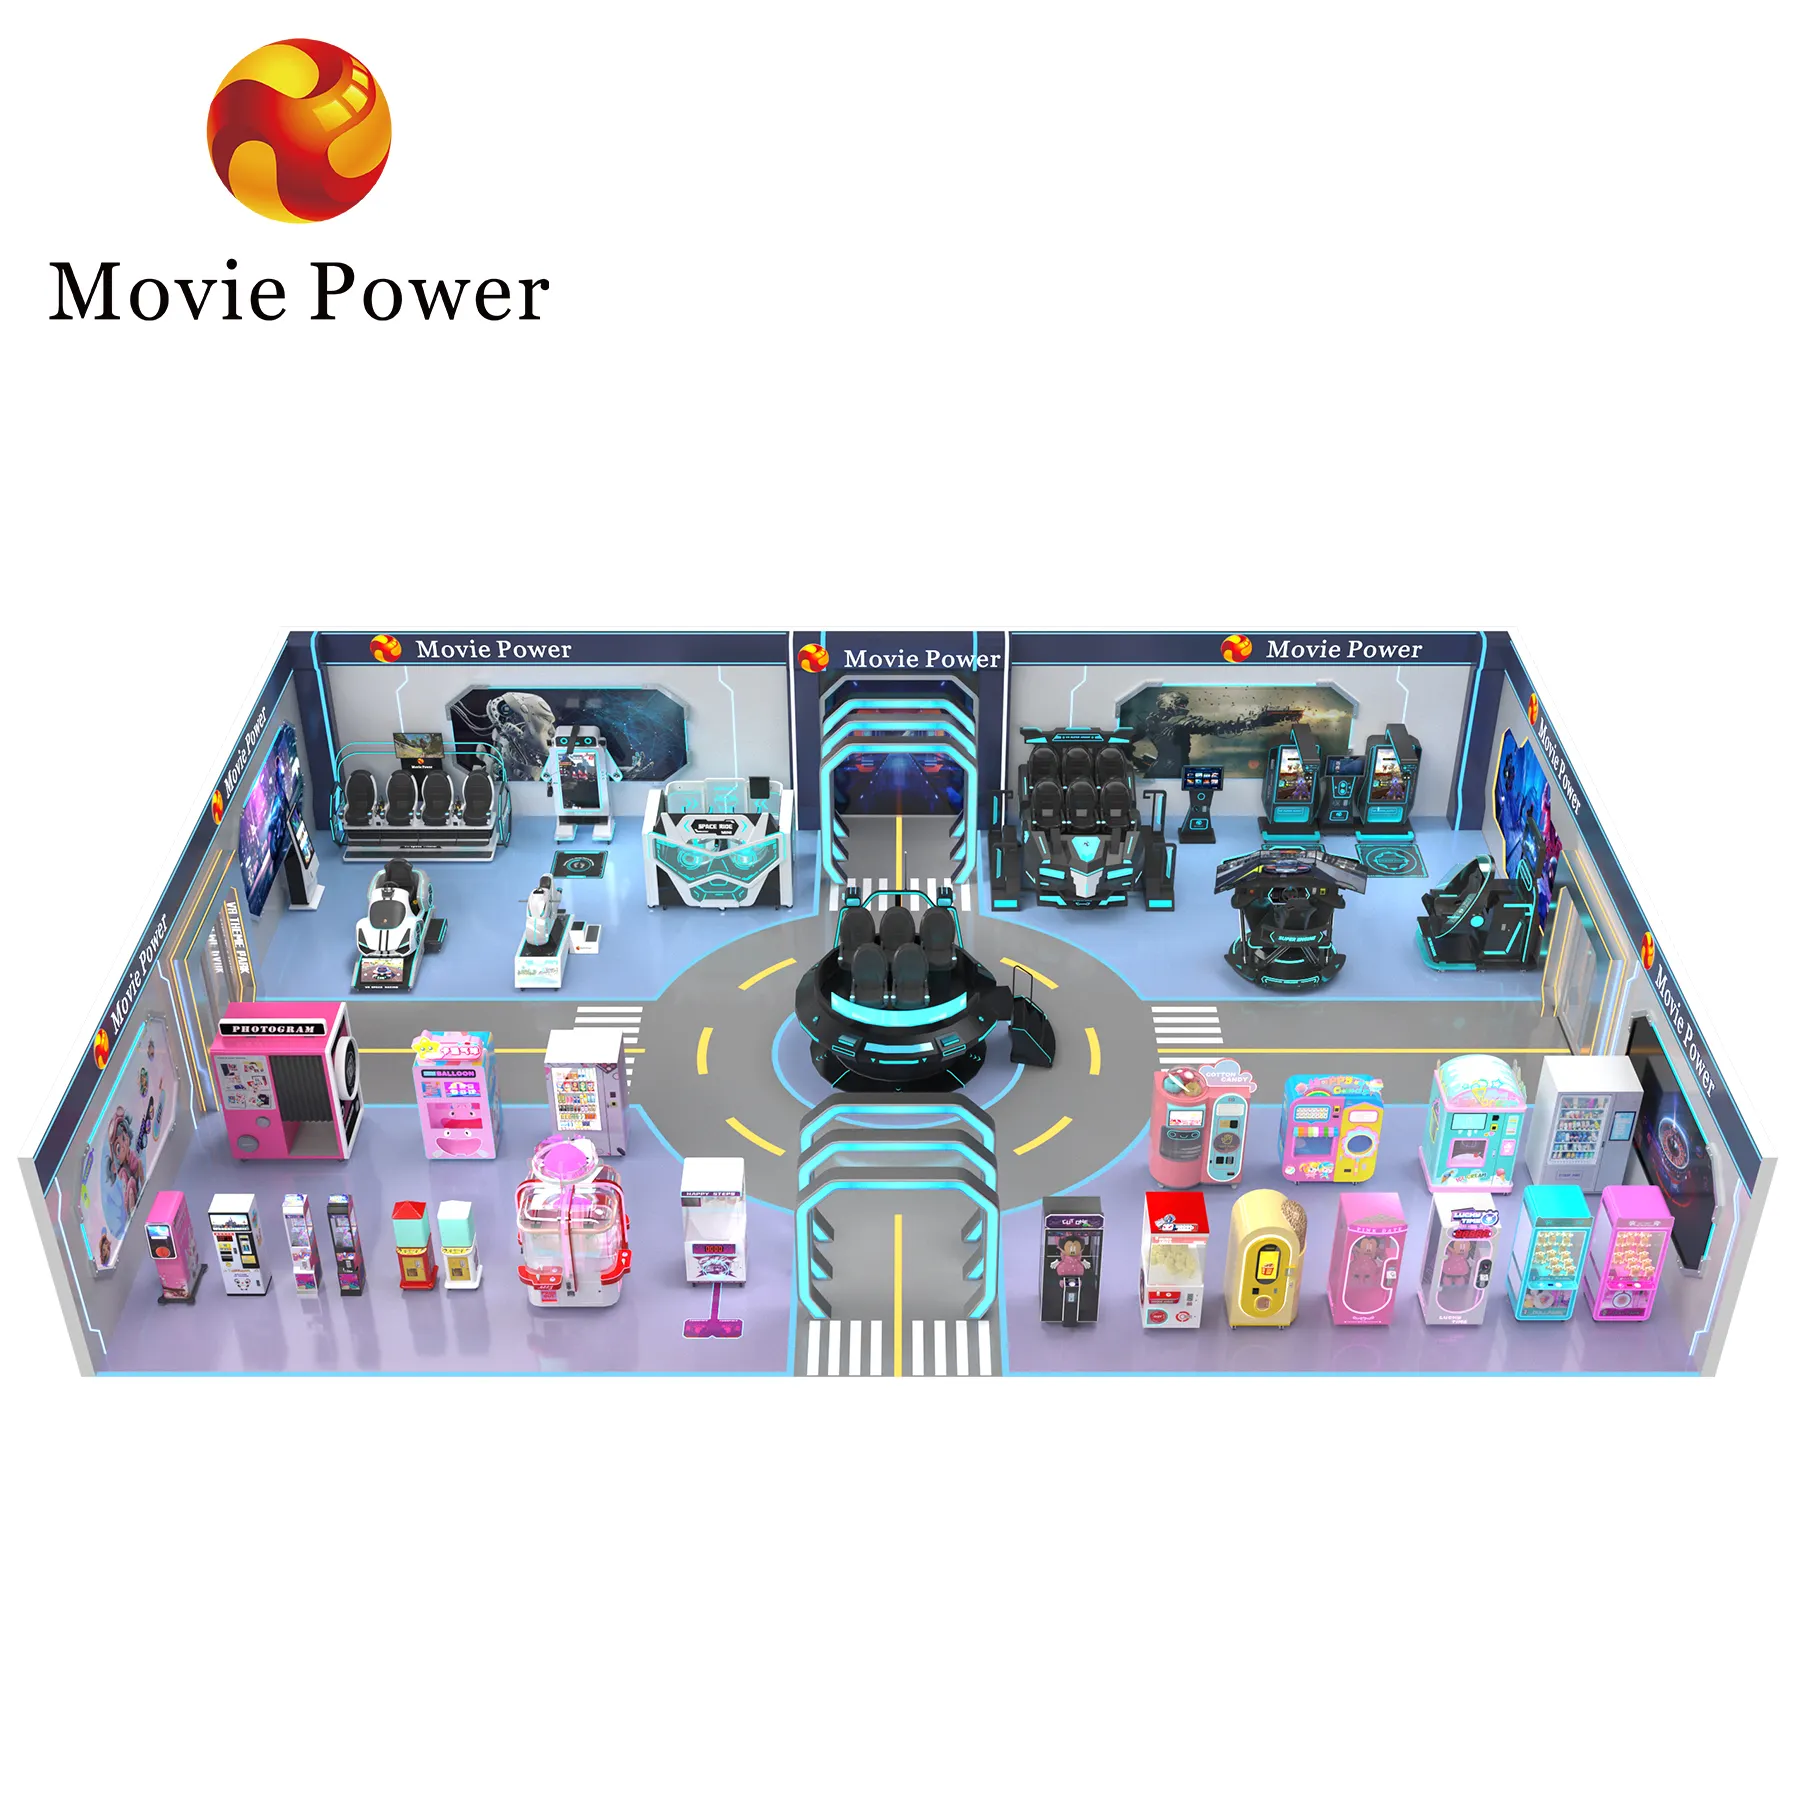 Professional Arcade Game Center 50-300 Square Meter Amusement Theme Park Indoor Game Room All In One Turnkey Solution